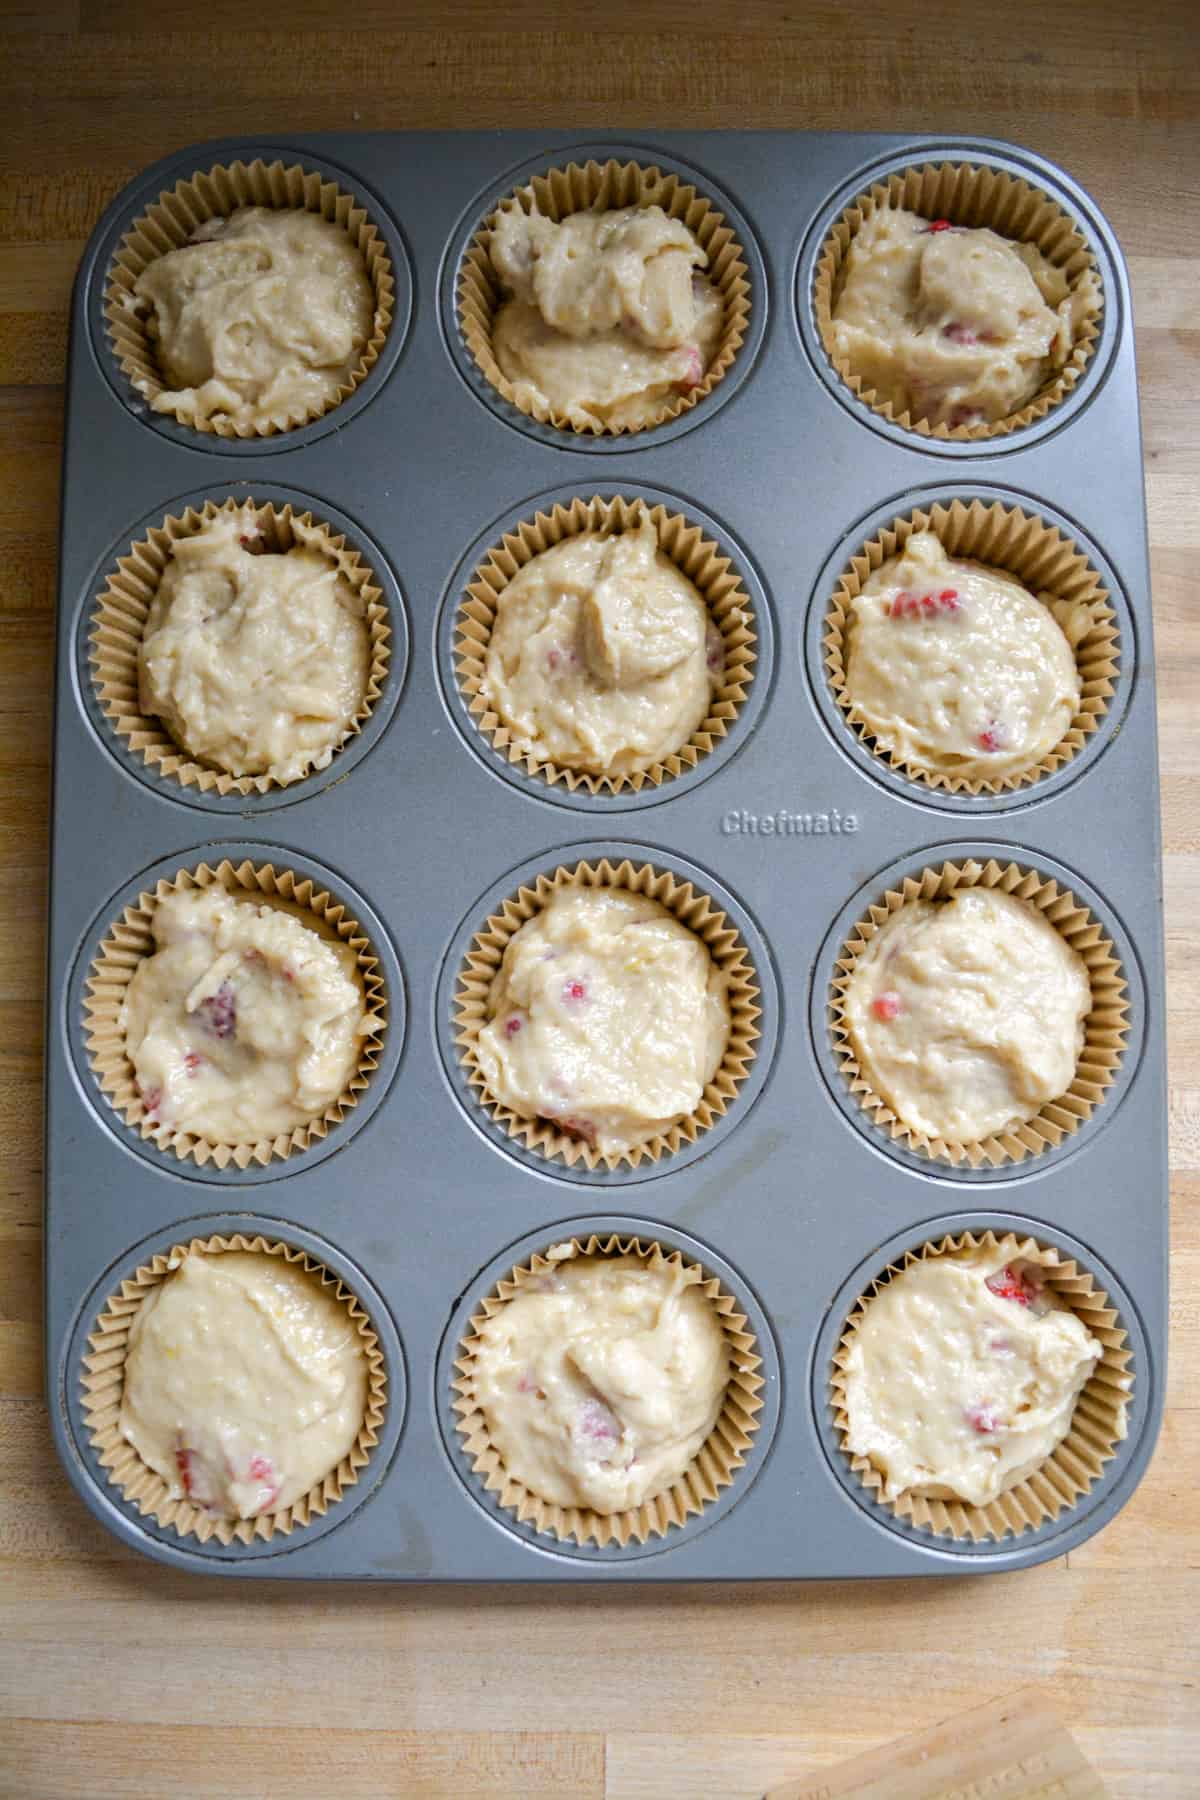 Raspberry muffin batter scooped into a lined muffin tin.